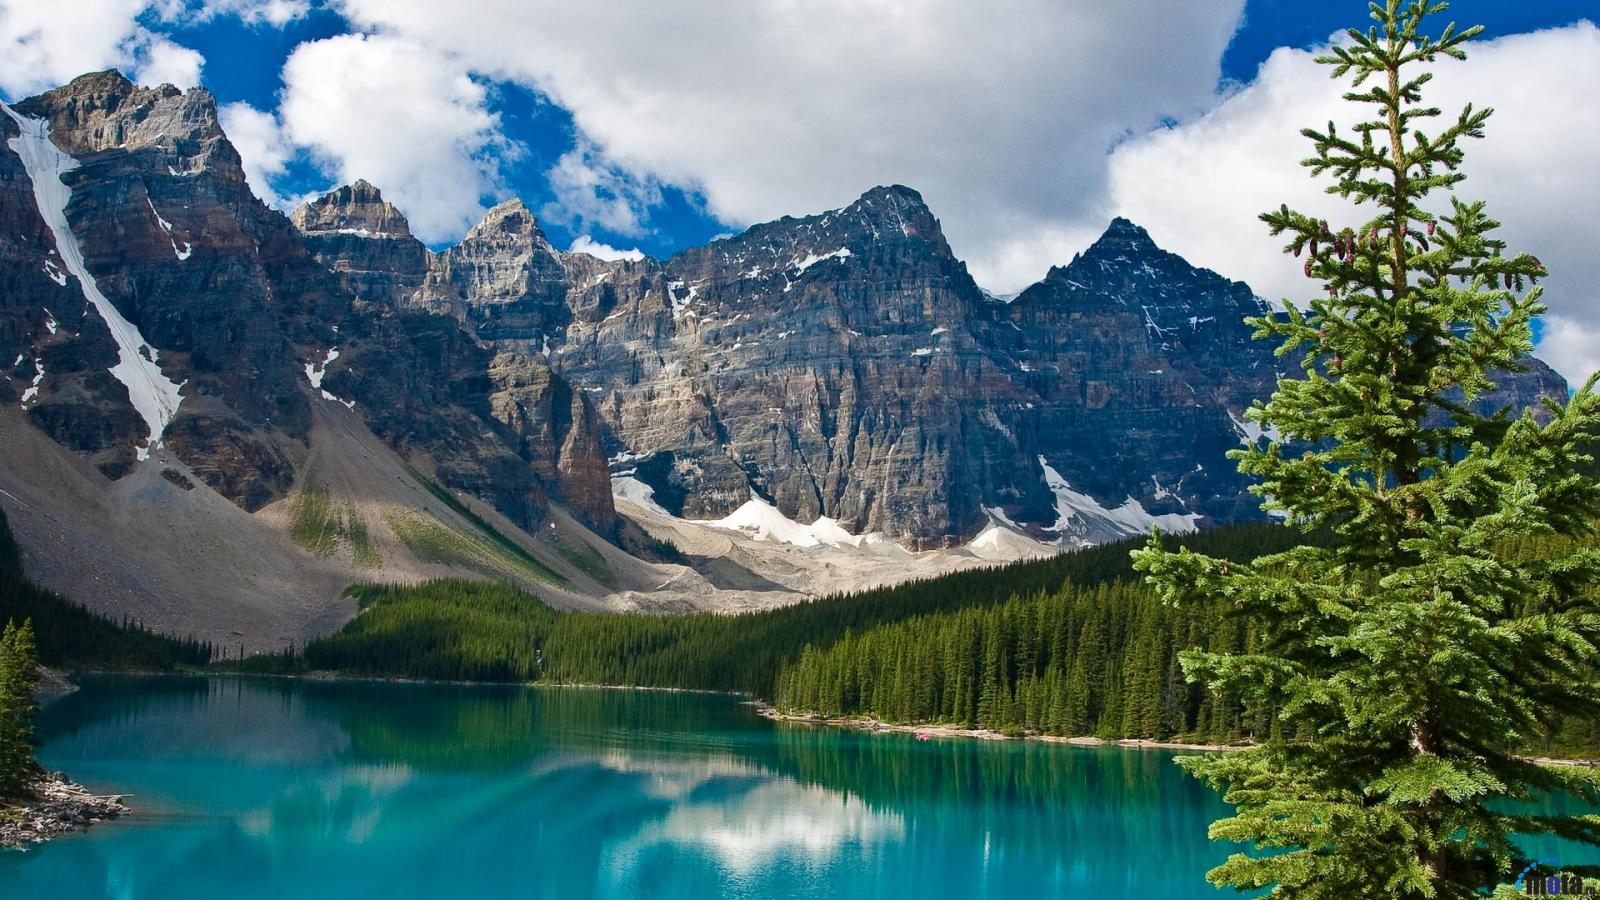 Download Wallpaper Blue lake and rocky mountains 1600 x 900